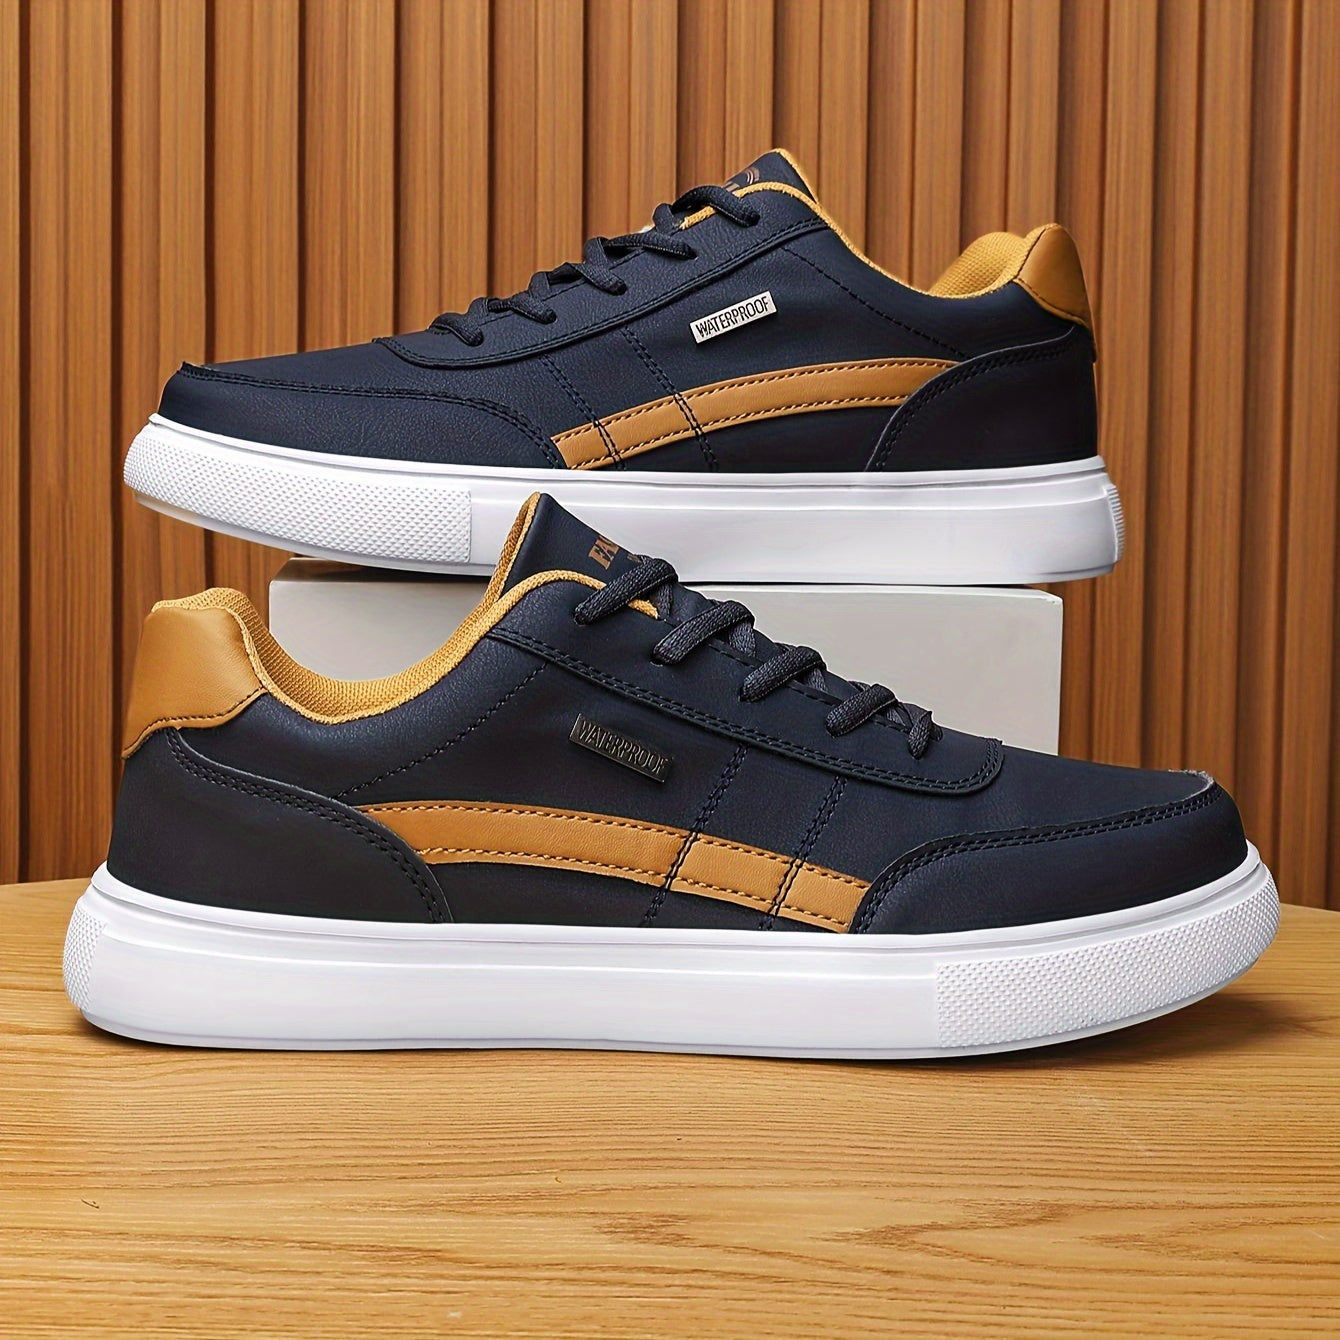 PLUS SIZE Trendy Skate Shoes, Comfy Casual Lace Up Sneakers